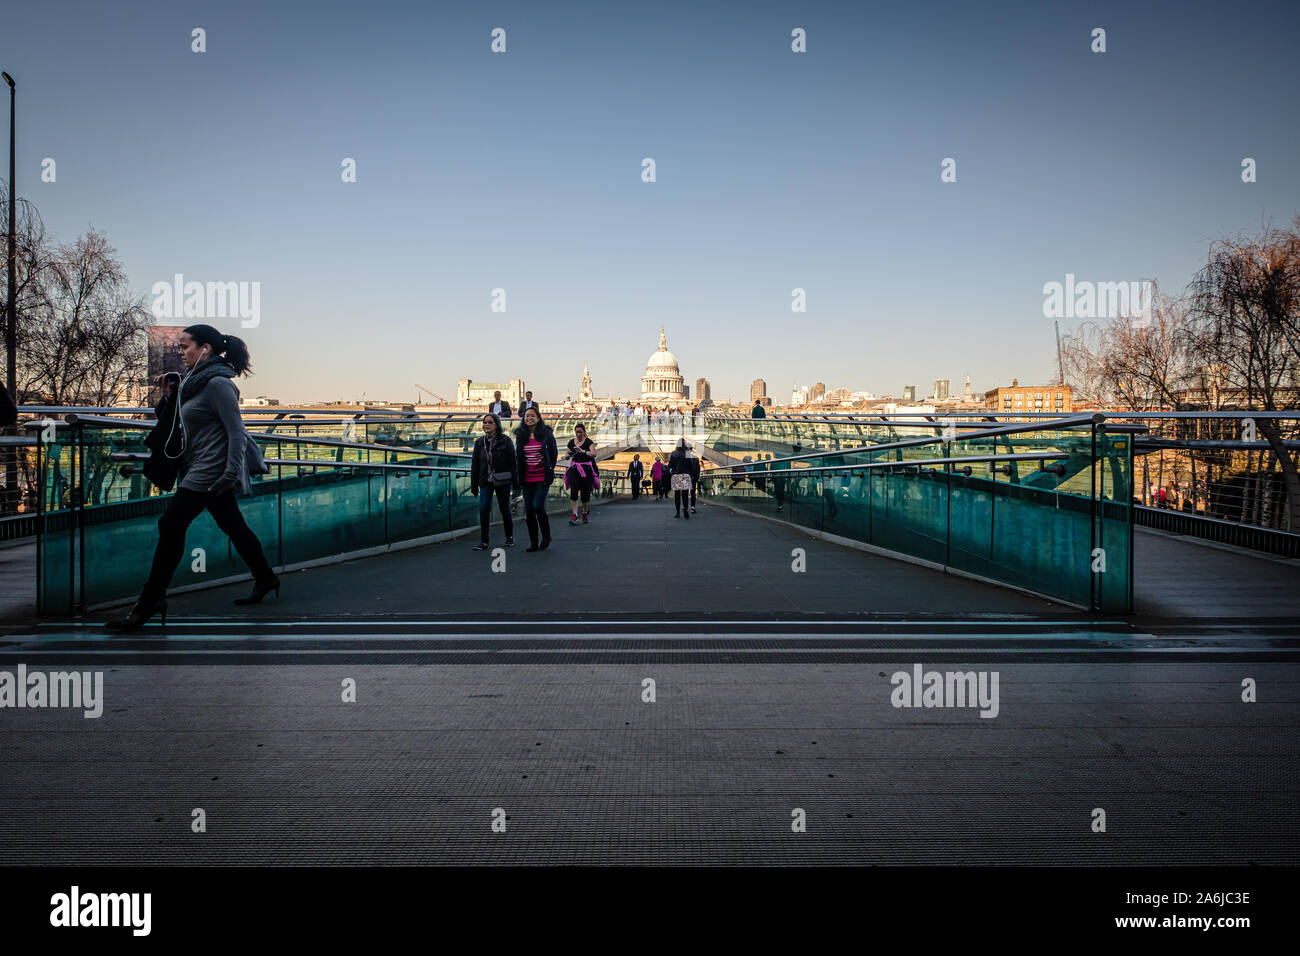 LONDON, UK, February 26, 2019: Pedestrians are walking over Millenium Bridge, St. Paul' s Cathedral beyond Stock Photo